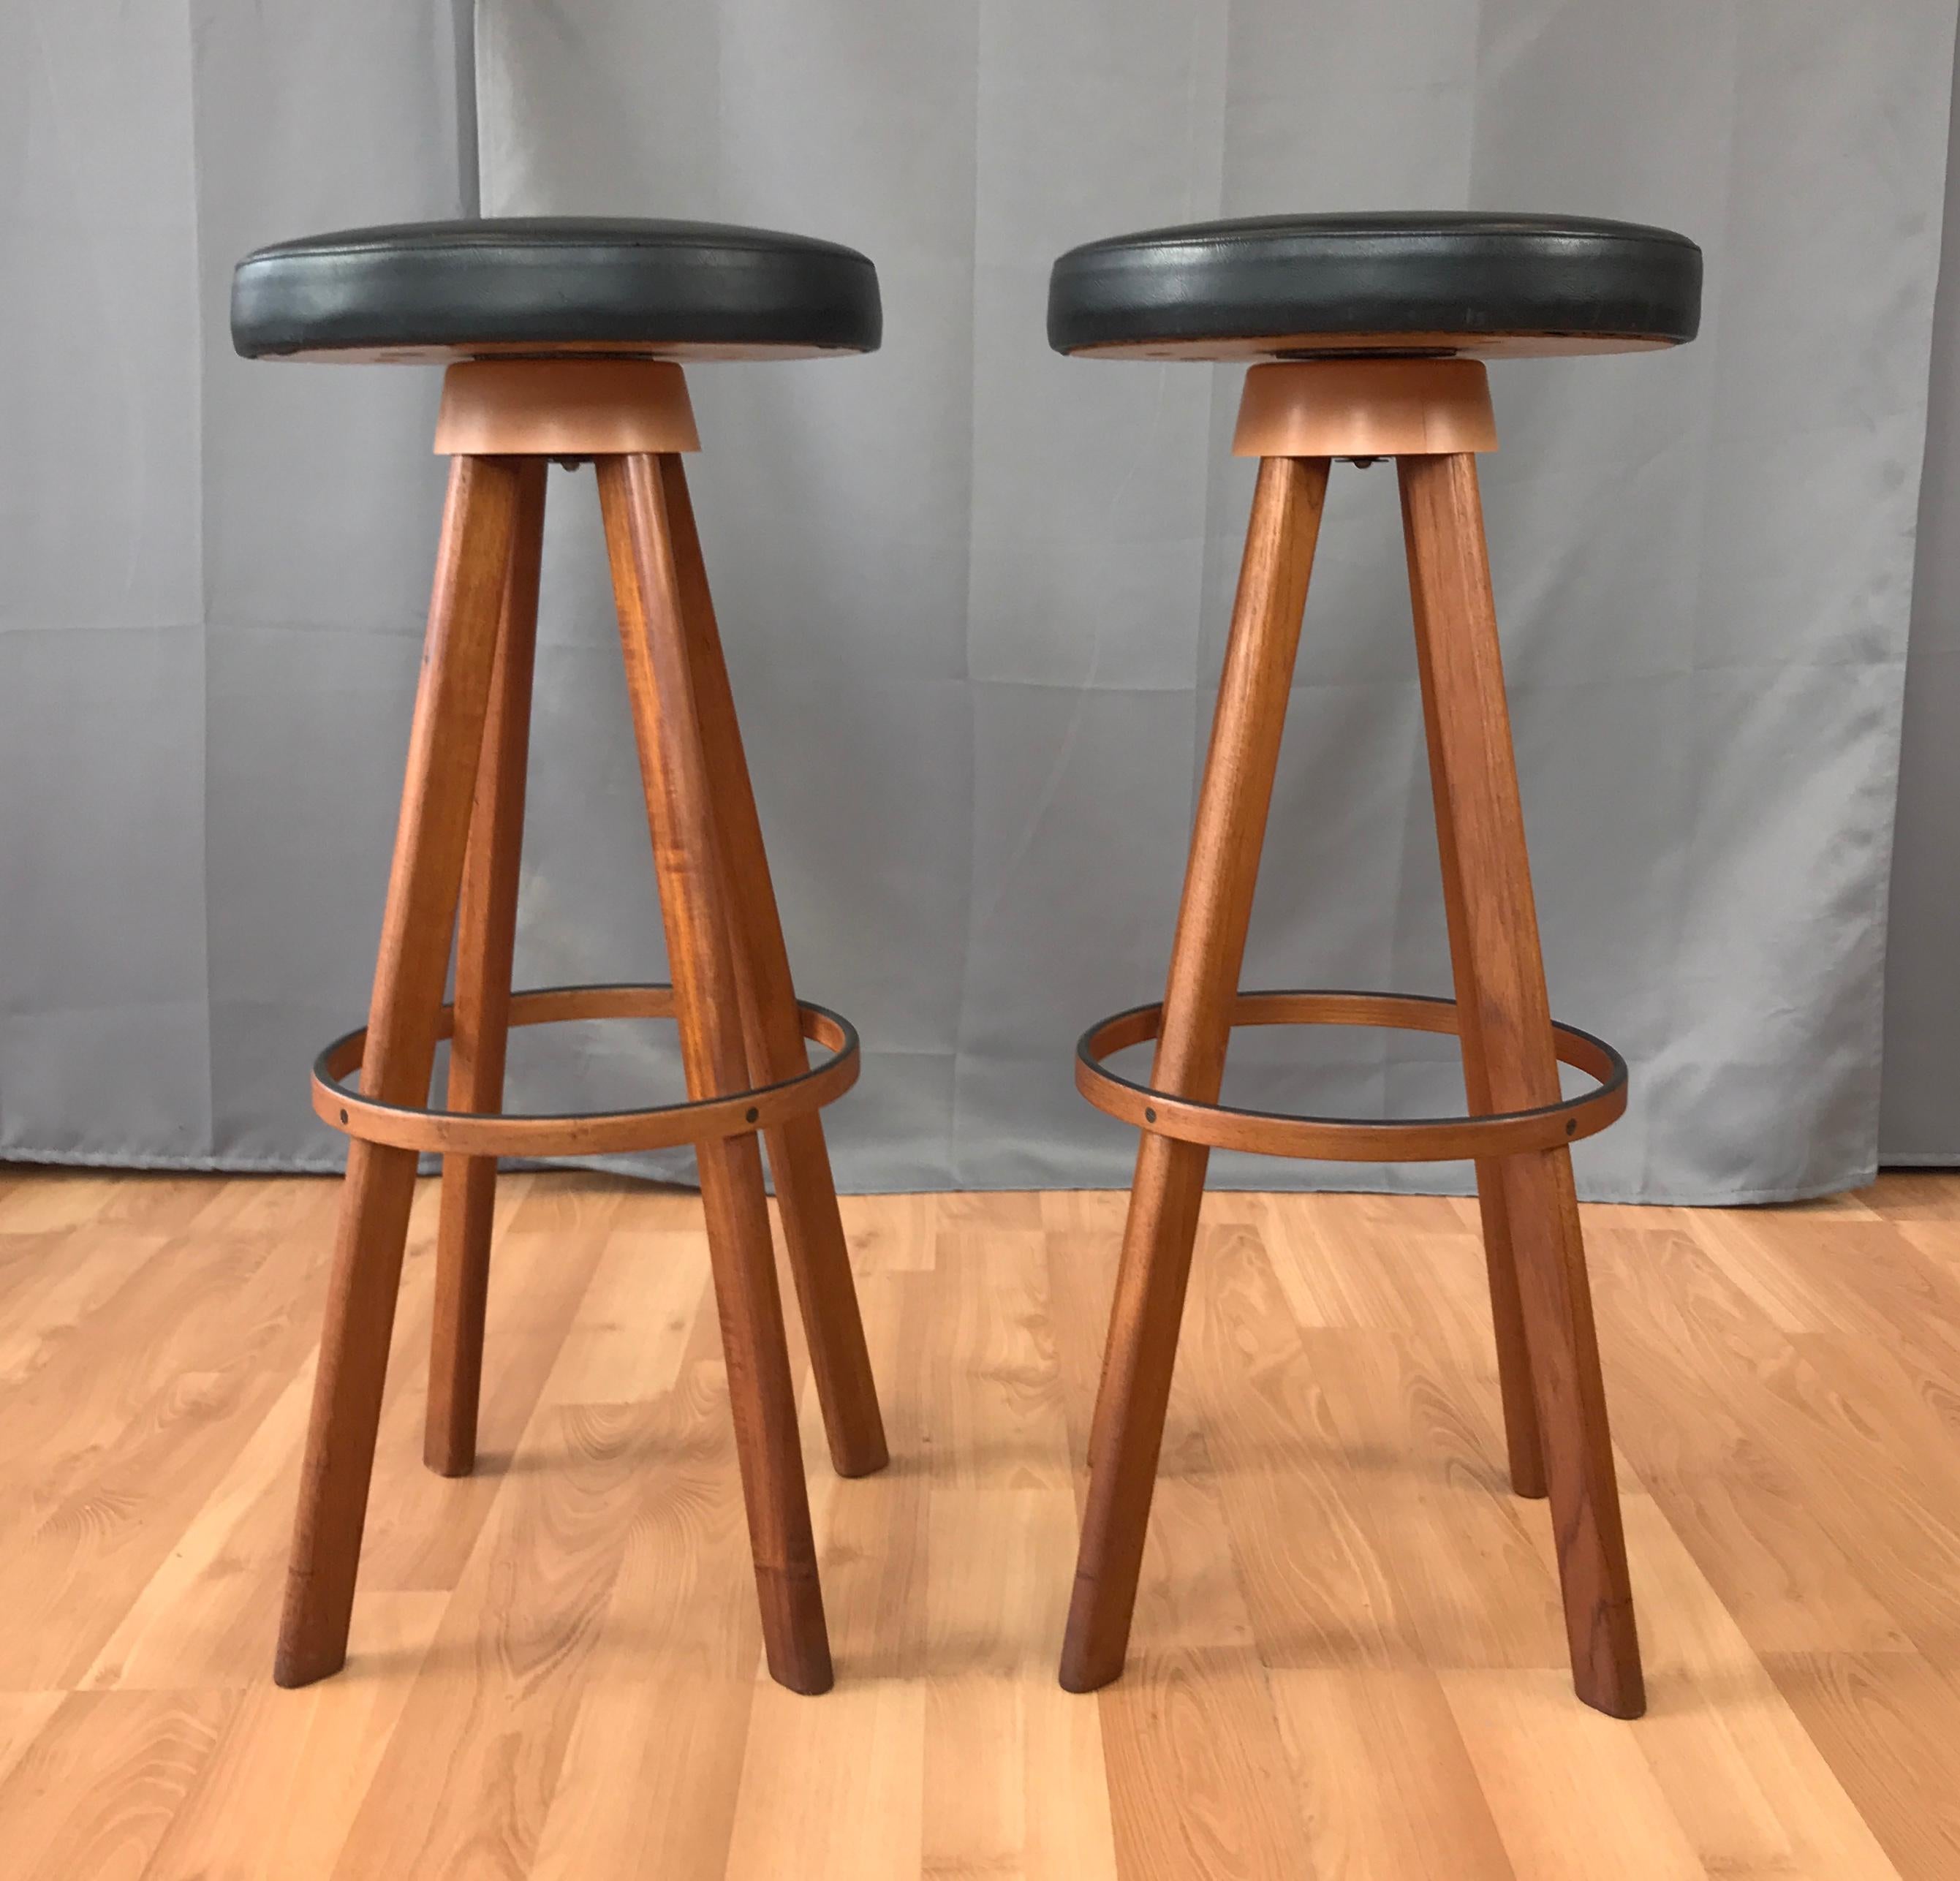 A pair bars stools, designed by Hans Olsen, for Frem Rojle. Solid Teak legs, bent plywood with Teak over footrest, tapers up to a swivelling round black vinyl seats. Marked on their undersides.